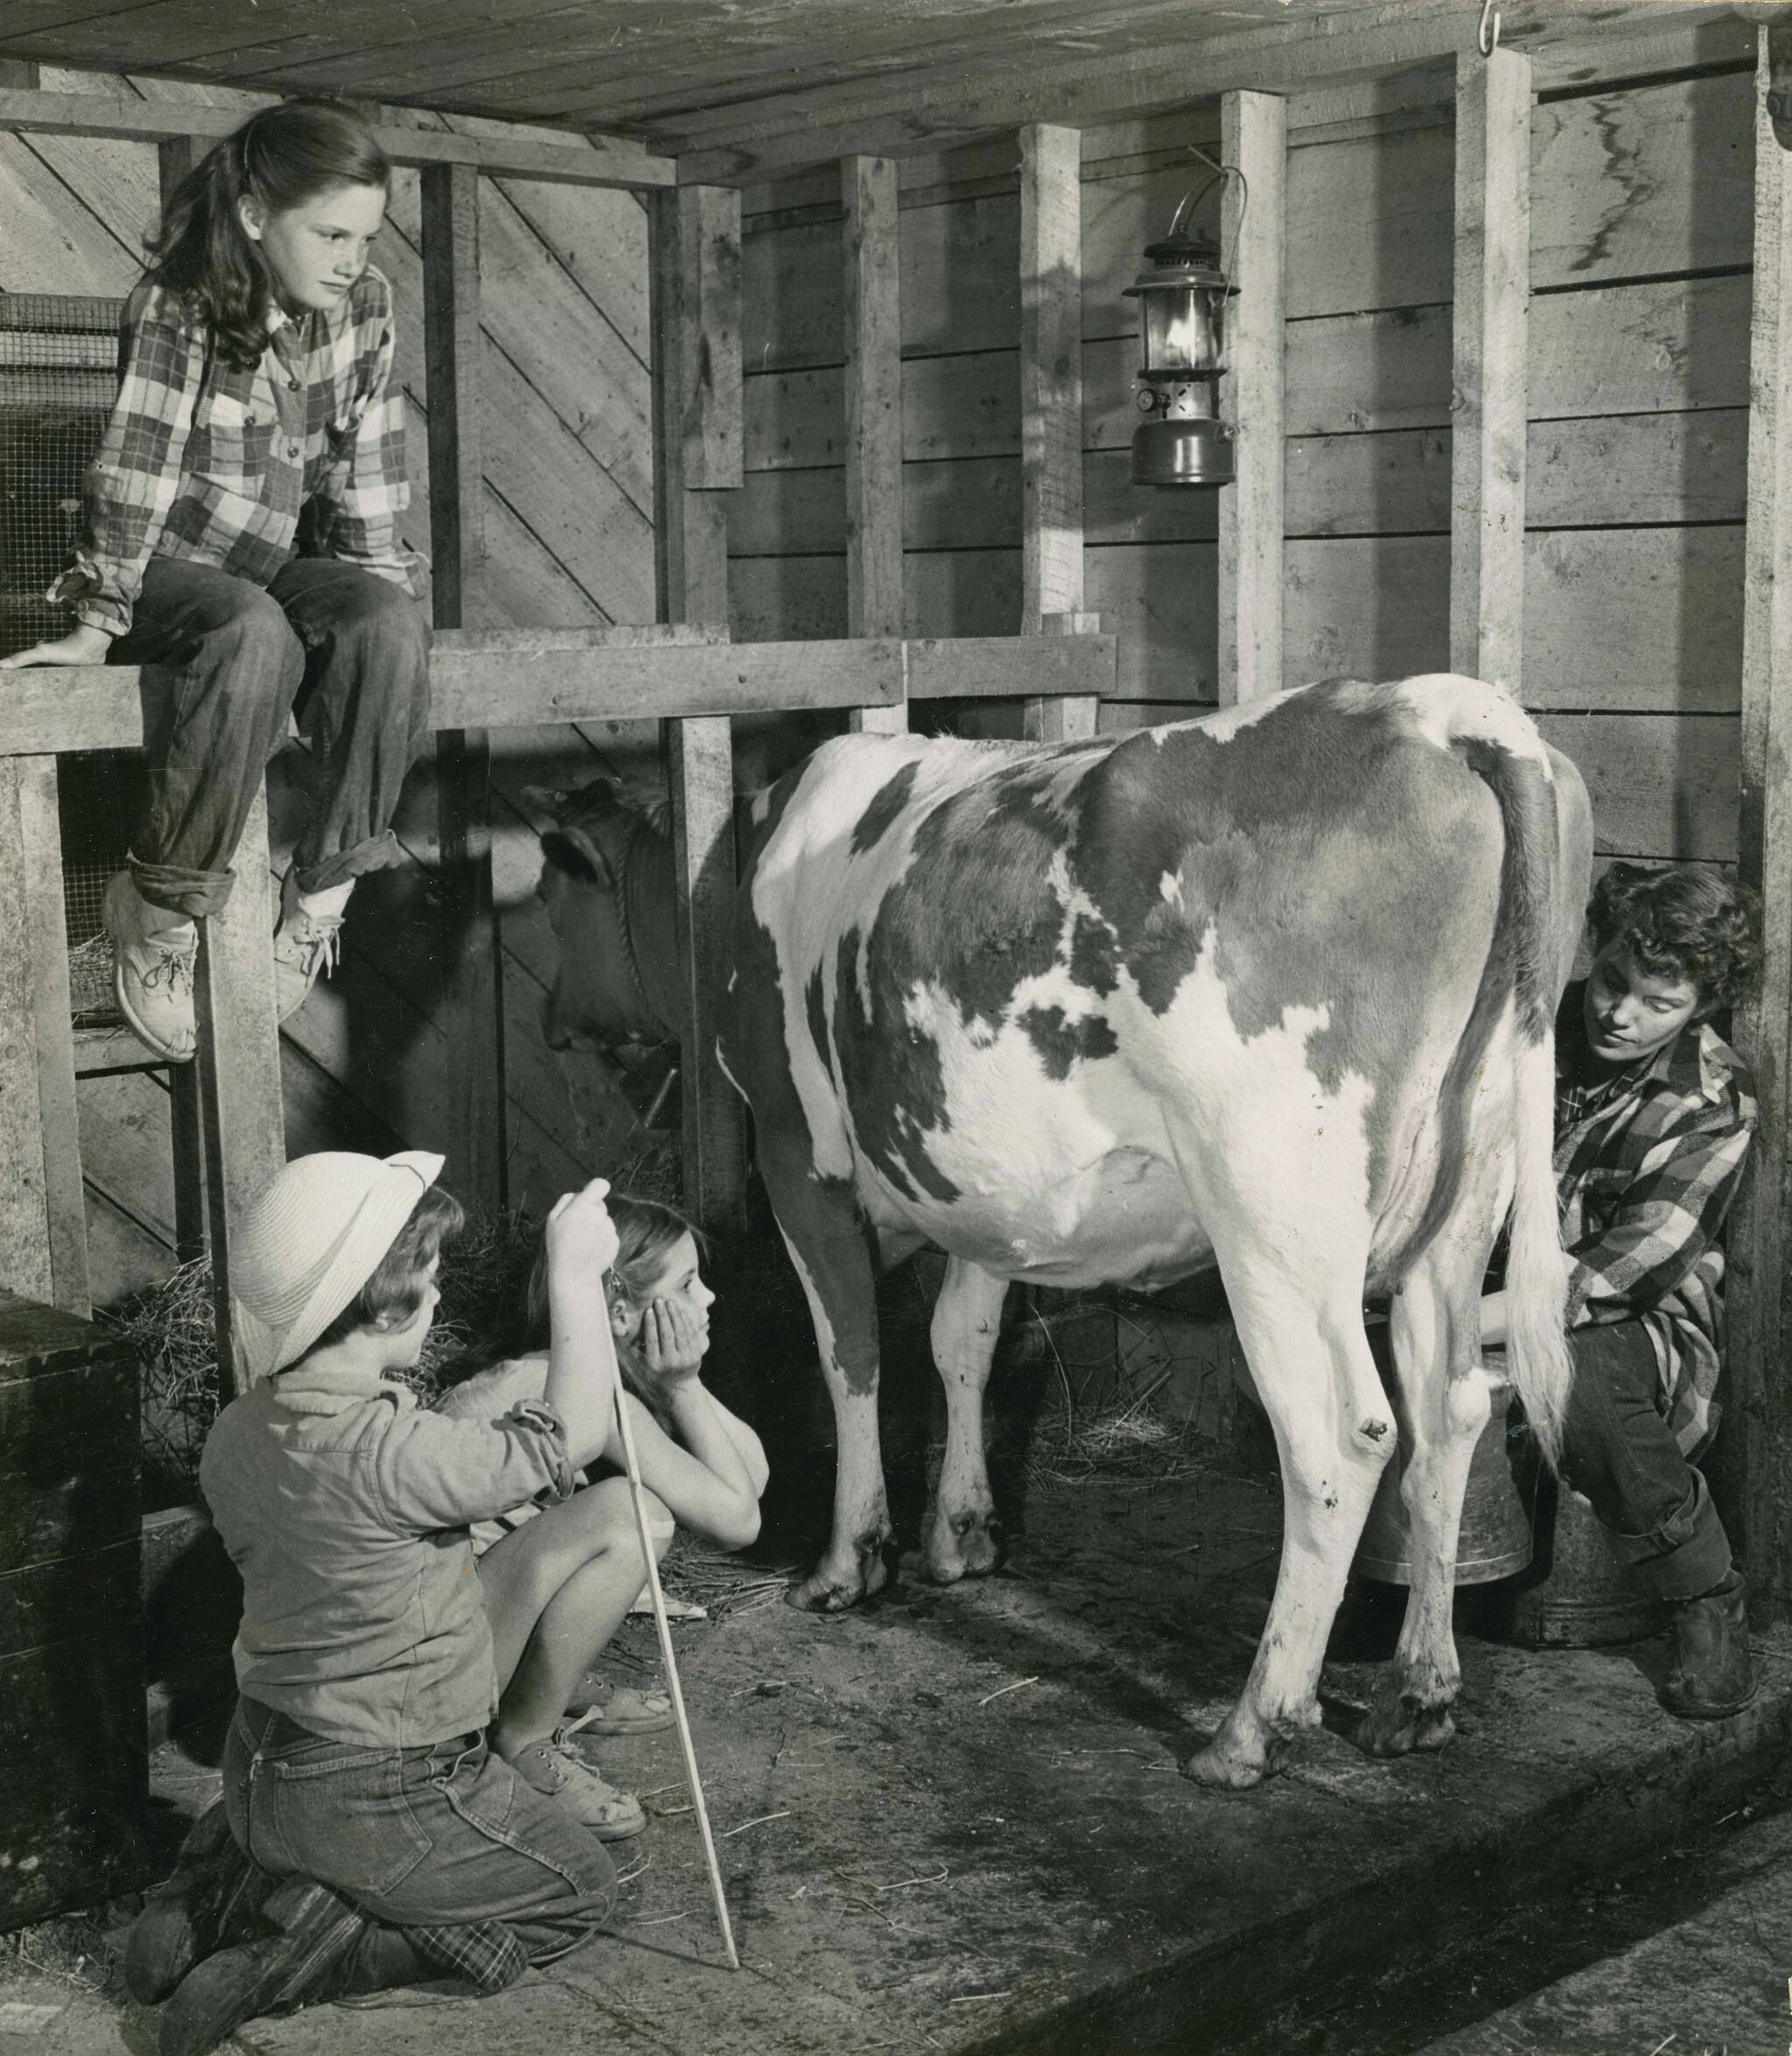 1954 photo by Bob and Ira Spring for Better Homes & Garden magazine
Rusty Lancashire milks the family cow while her daughters (Martha, above, and, L-R, Abby and Lori) watch.